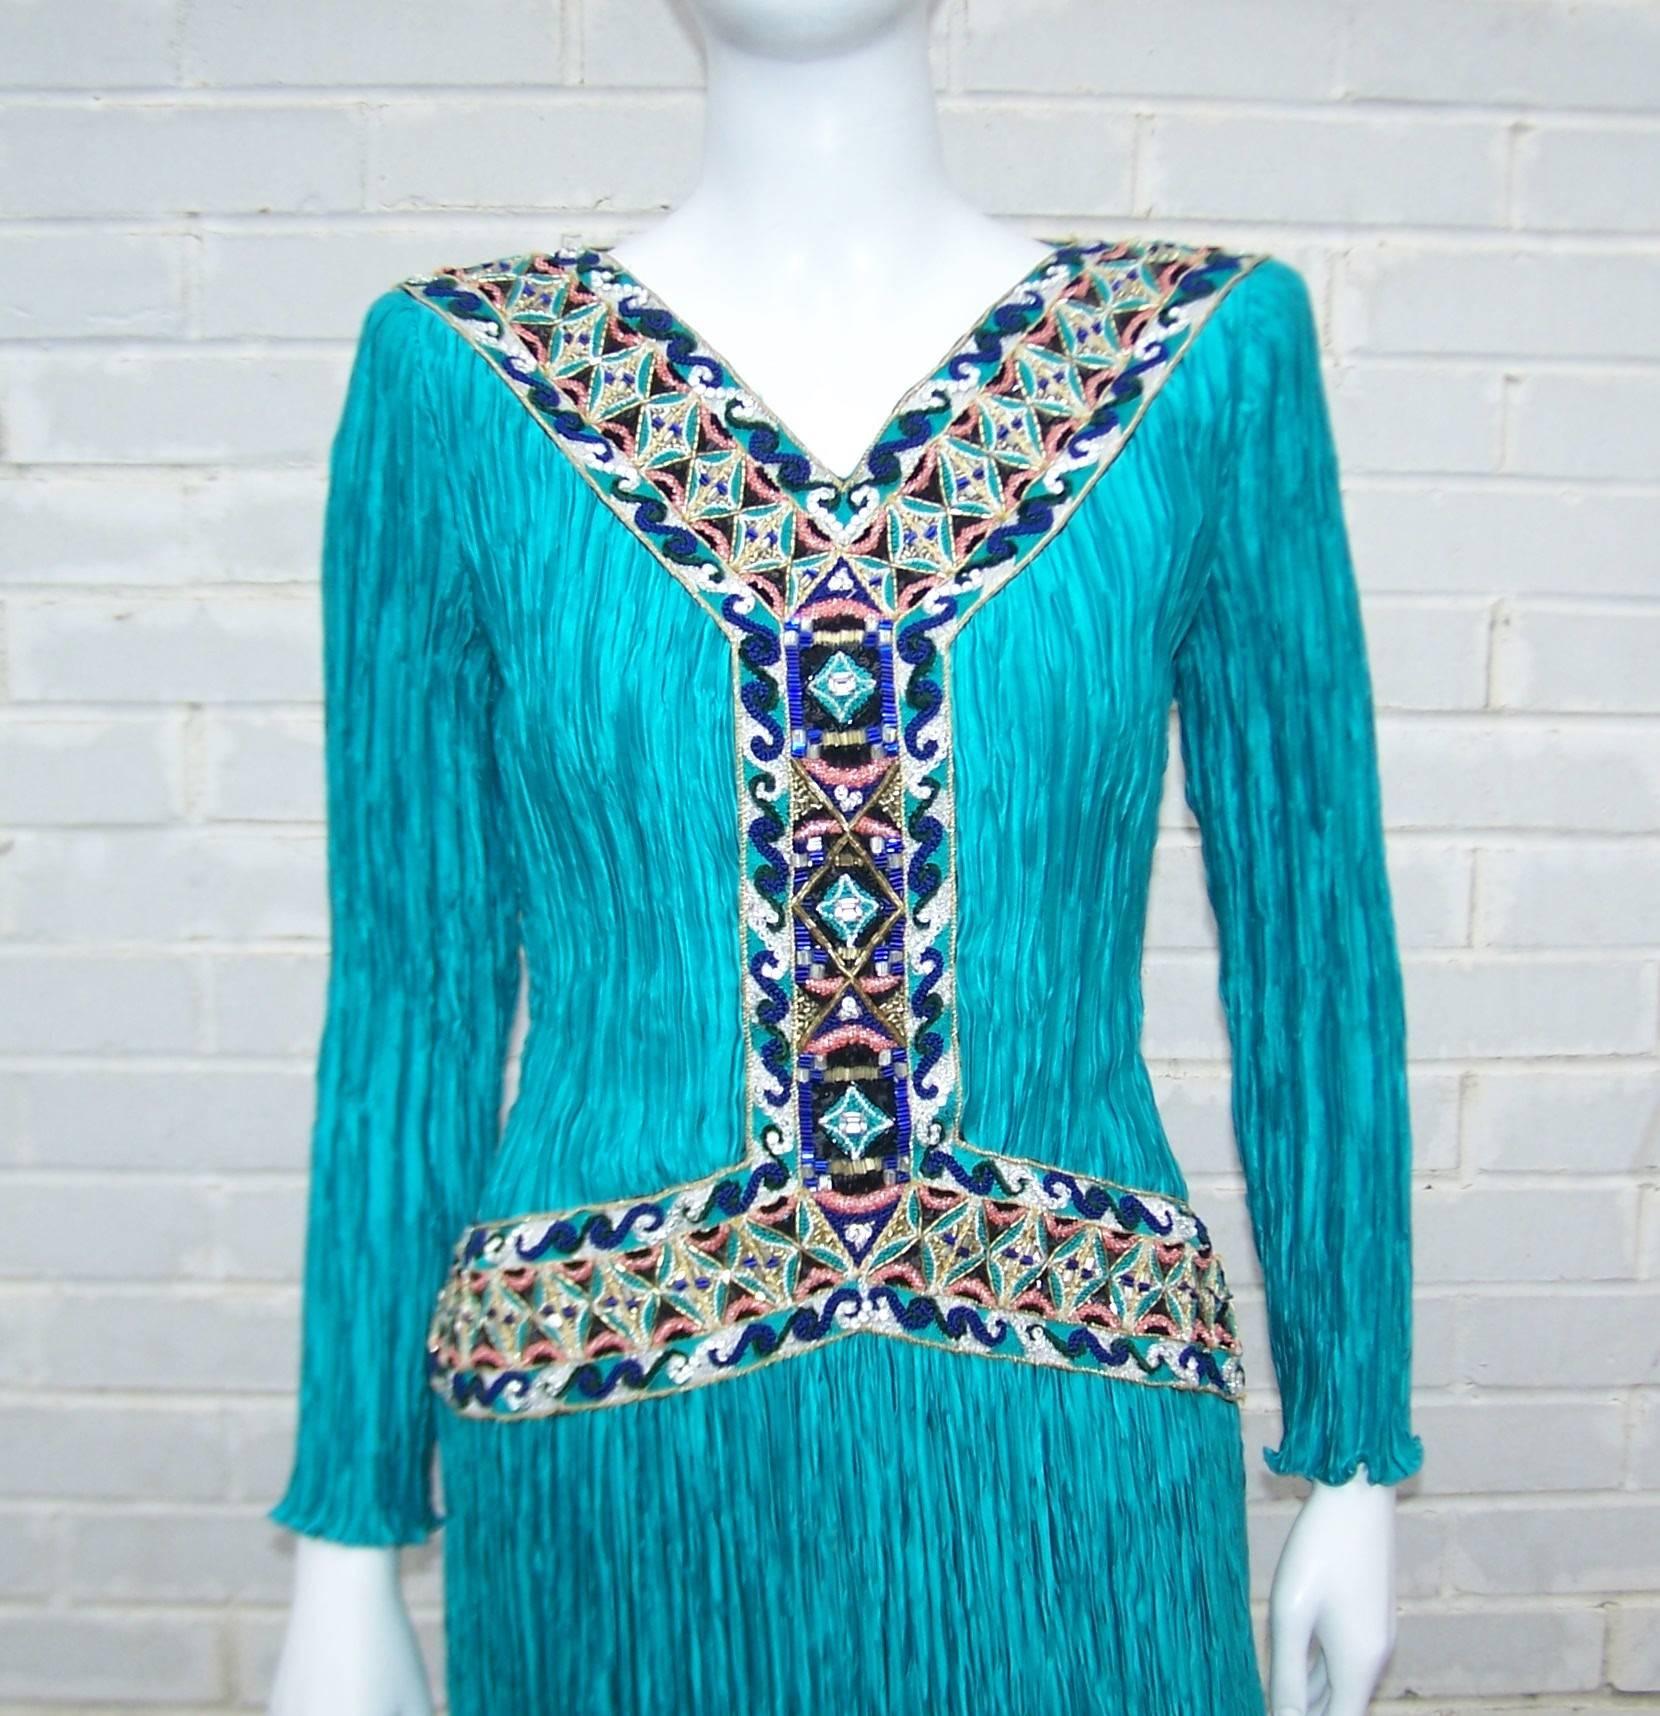 Create a modern day Cleopatra look with this stunning Mary McFadden Couture goddess dress from the 1980's.   The turquoise micro pleated fabric is a nod to the feminine designs of Mario Fortuny and is an iconic feature of Ms. McFadden's style.  The